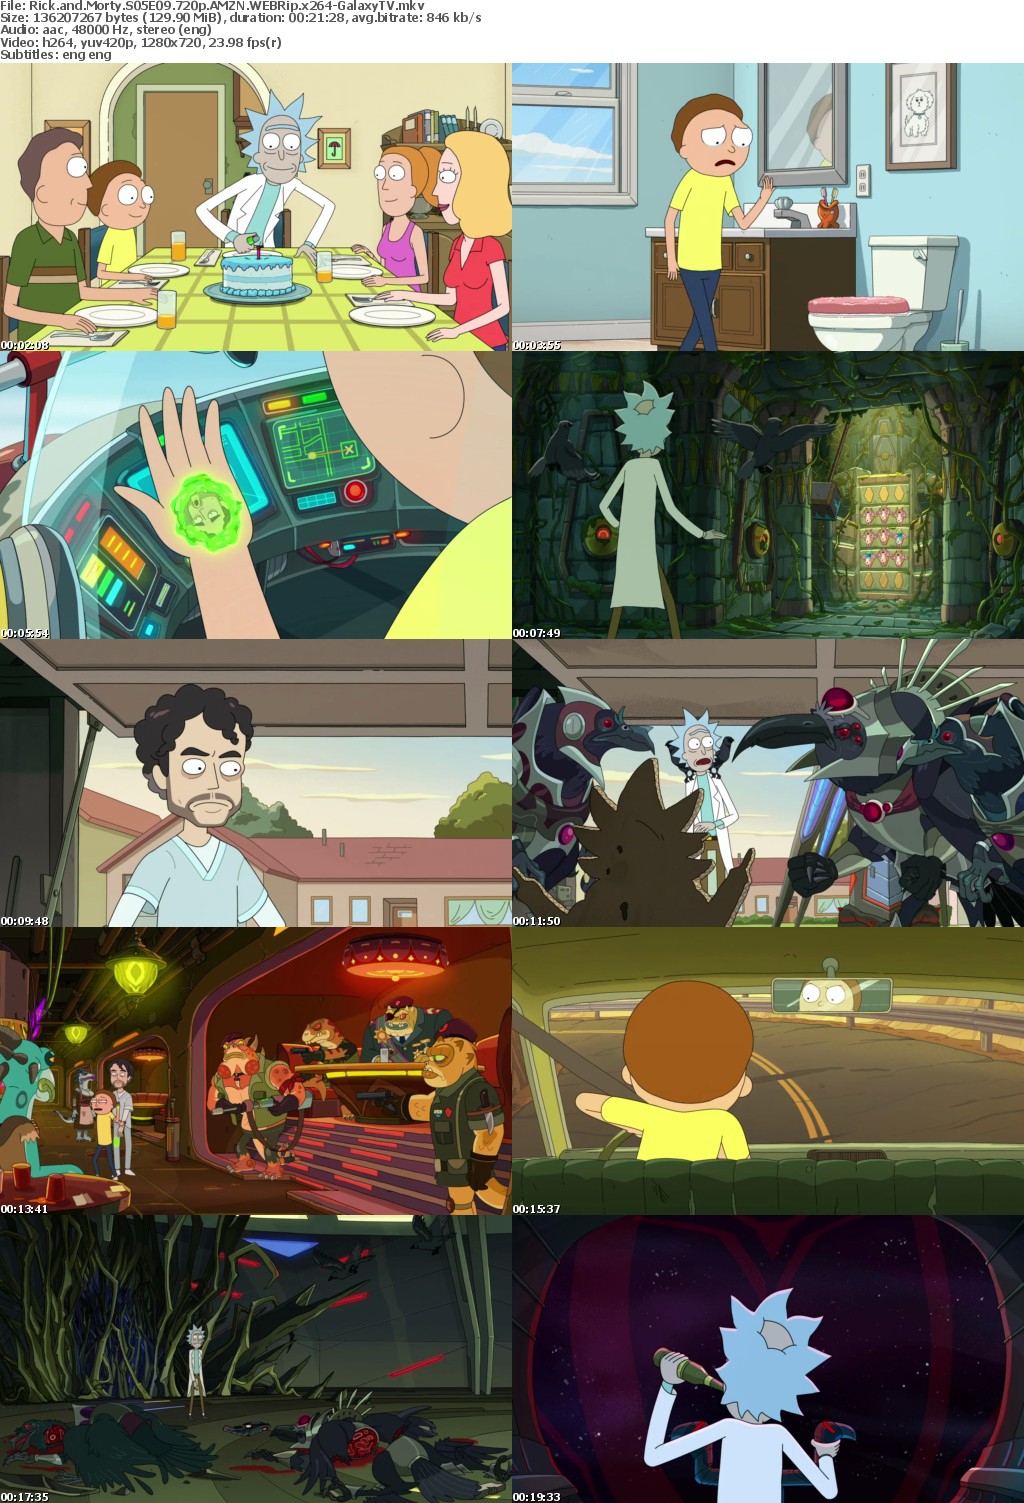 Rick and Morty S05 COMPLETE 720p AMZN WEBRip x264-GalaxyTV